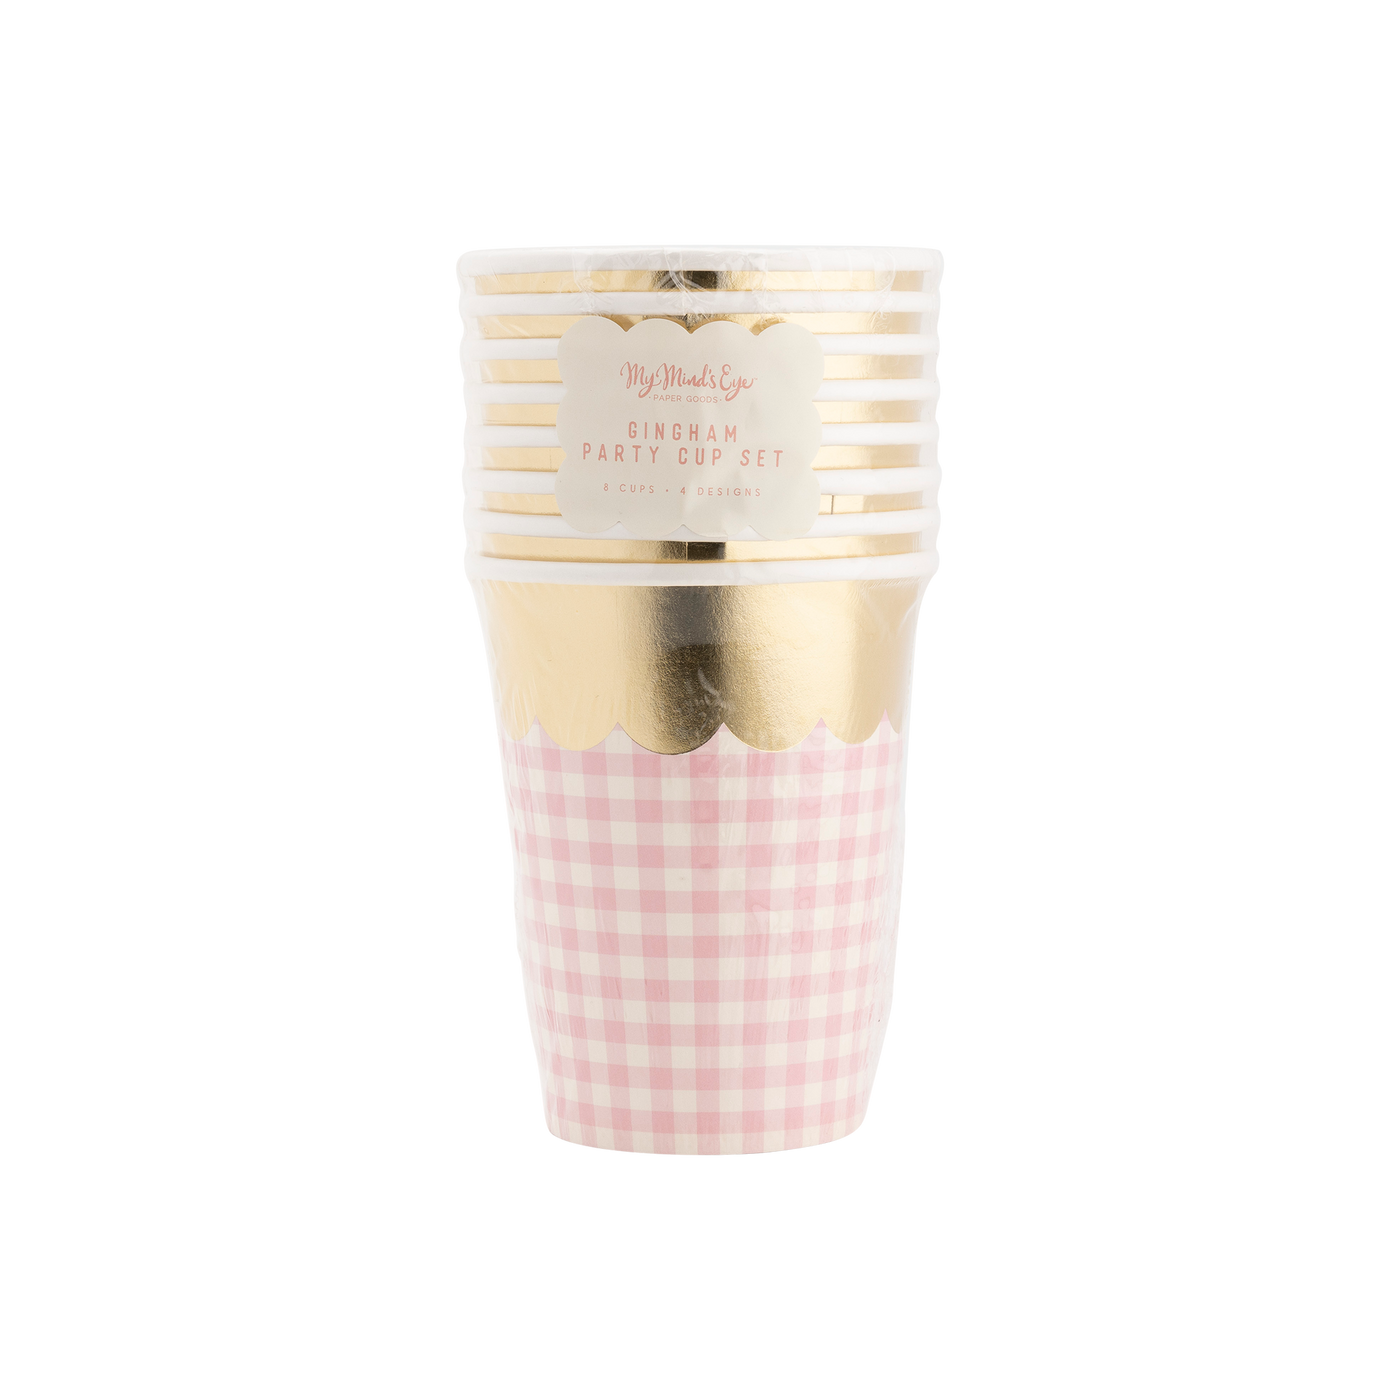 Multi Colored Gingham Cups with Gold Scallop